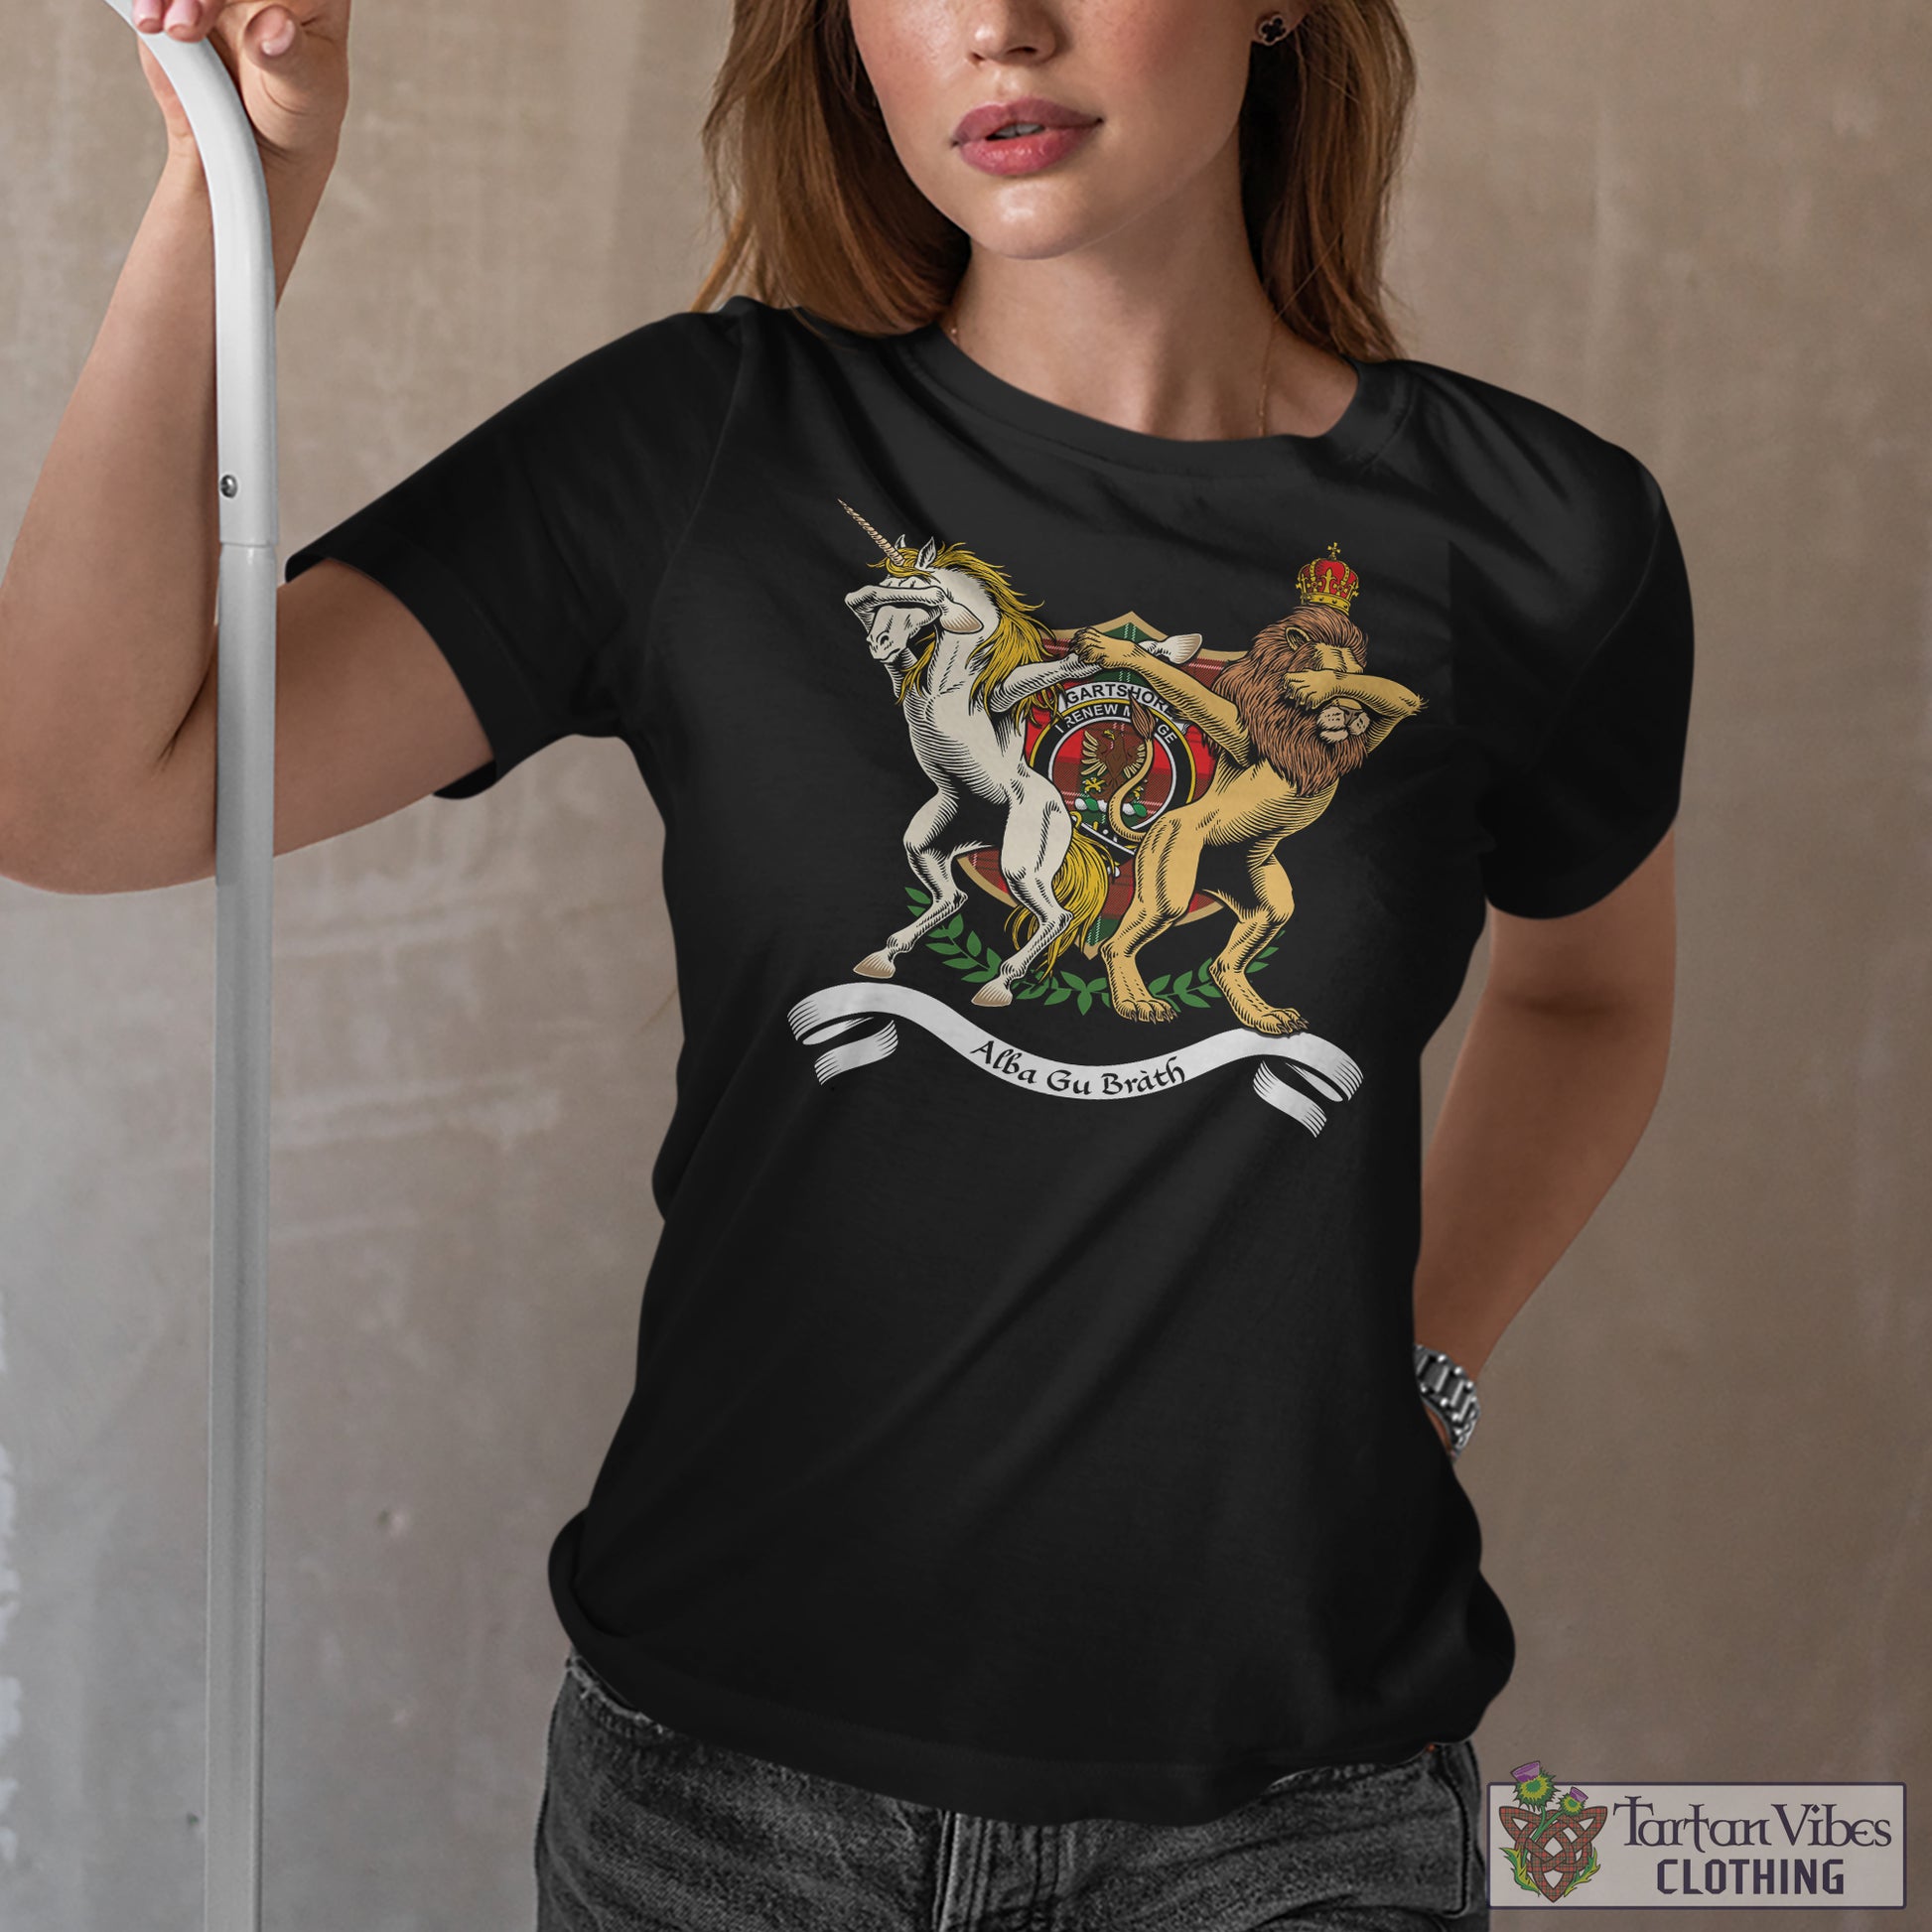 Tartan Vibes Clothing Gartshore Family Crest Cotton Women's T-Shirt with Scotland Royal Coat Of Arm Funny Style